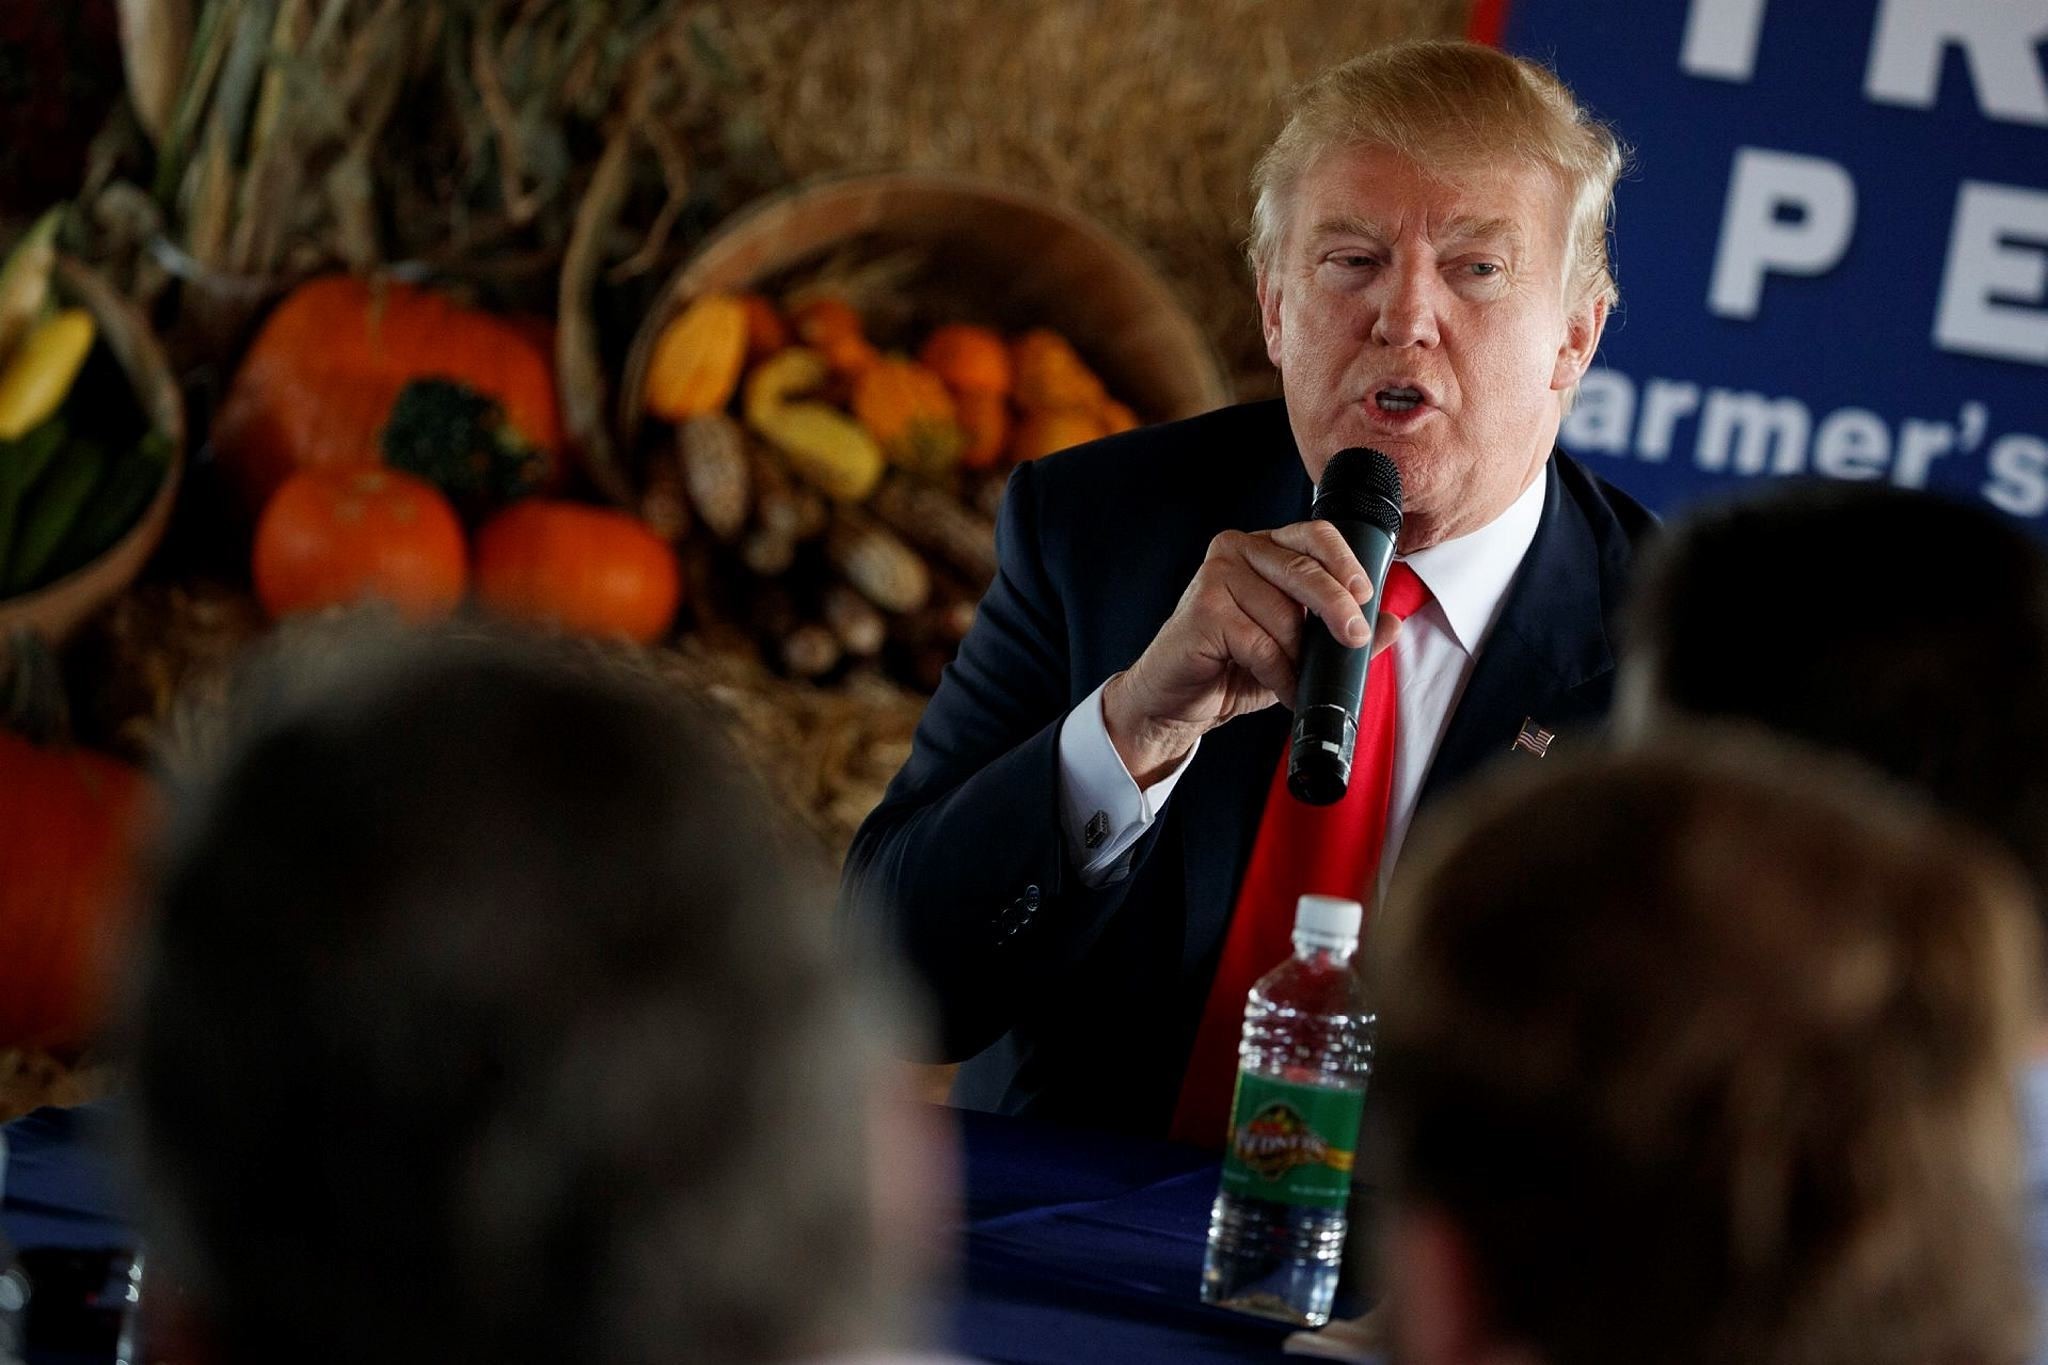 epublican presidential candidate Donald Trump speaks during a meeting with local farmers at Bedners Farm Fresh Market, Monday, Oct. 24, 2016, in Boynton Beach, Fla. (AP Photo)